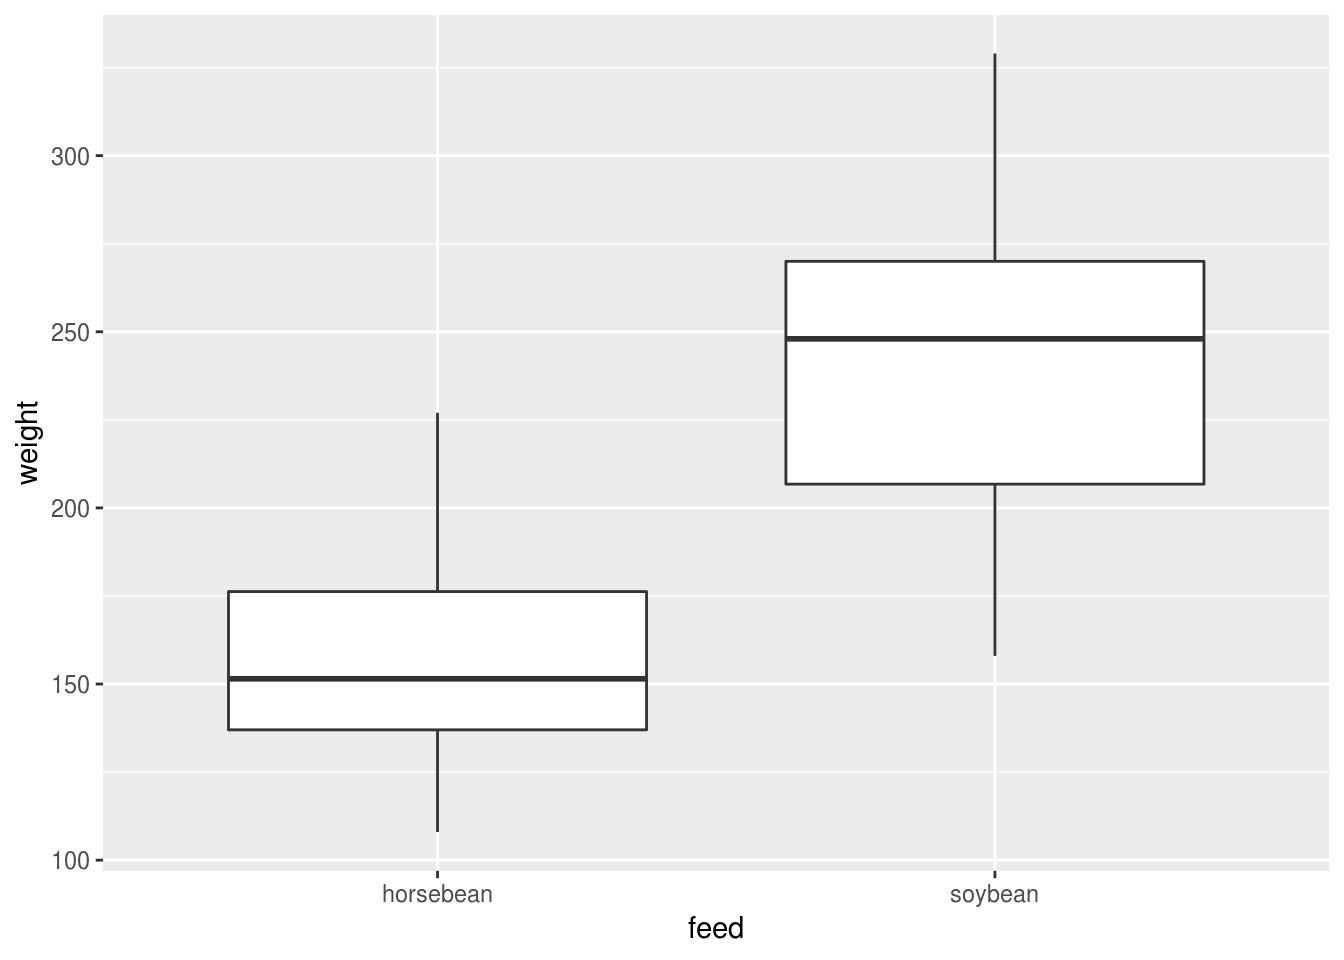 The box in a boxplot indictes the IQR; the whisker indicates the min/max values or 1.5  imes the IQR, whichever is the smaller. If there are outliers beyond 1.5    imes the IQR then they are shown as points.